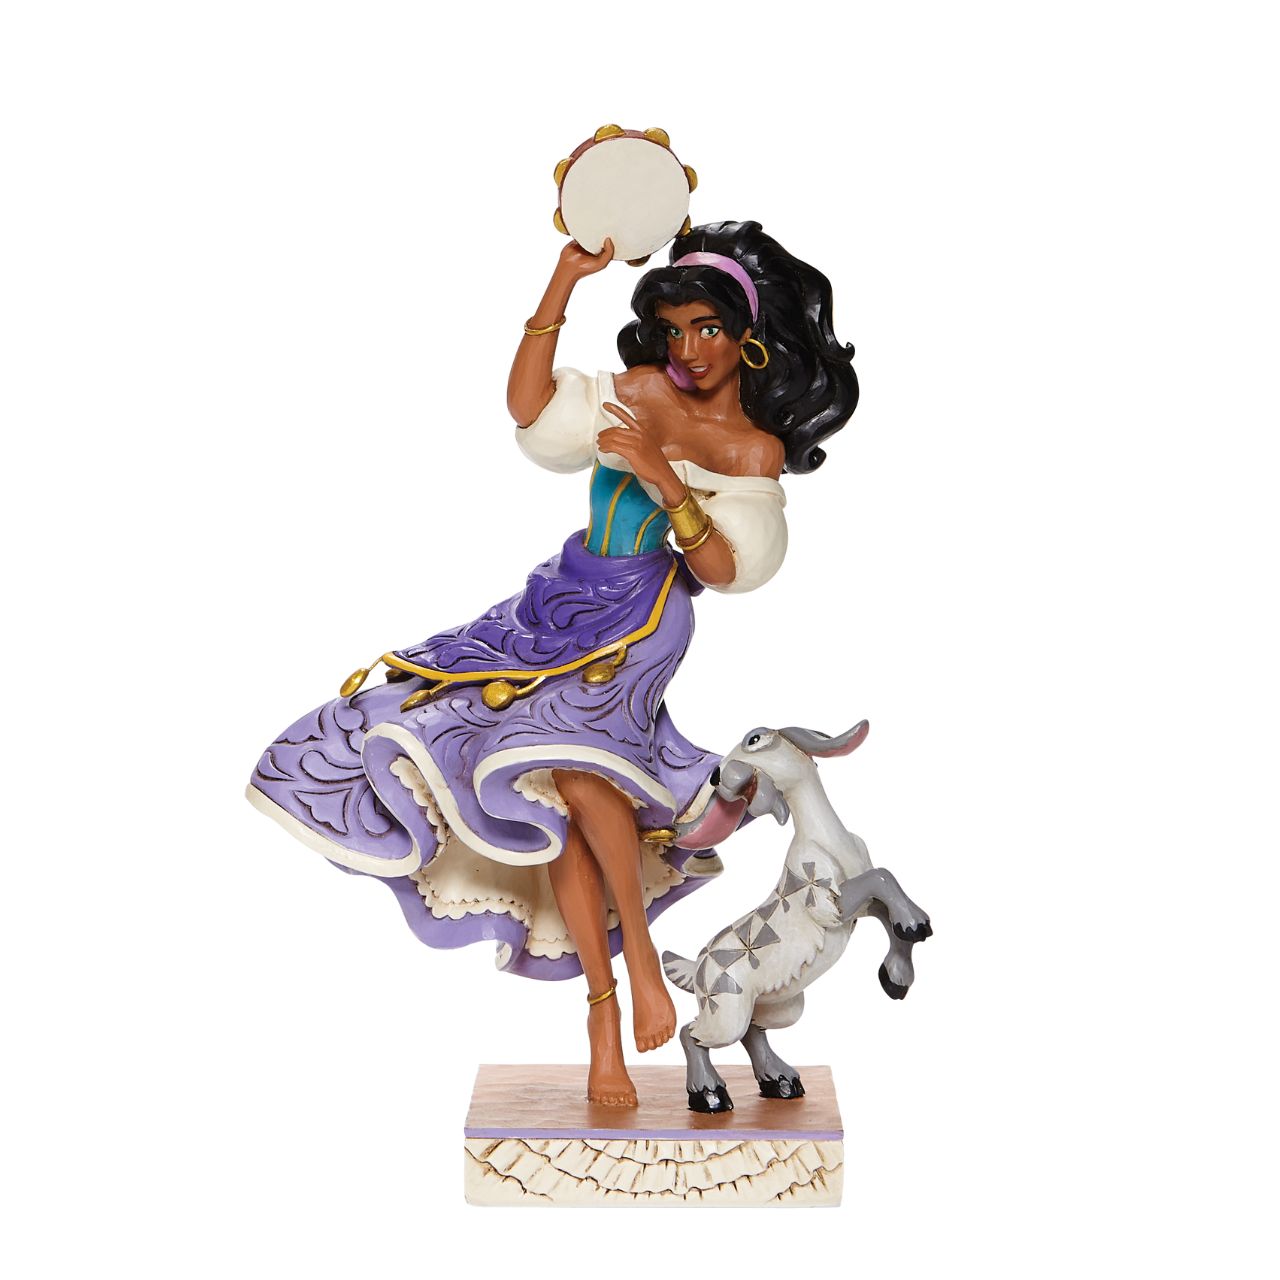 Disney Traditions Esmeralda & Djali  from The Hunchback of Notre Dame  Loyal goat Djali assists his kind-hearted gypsy owner, Esmeralda, as she performs in Disney's classic, Hunch Back of Notre Dame, in this designed by Jim Shore sculpt.